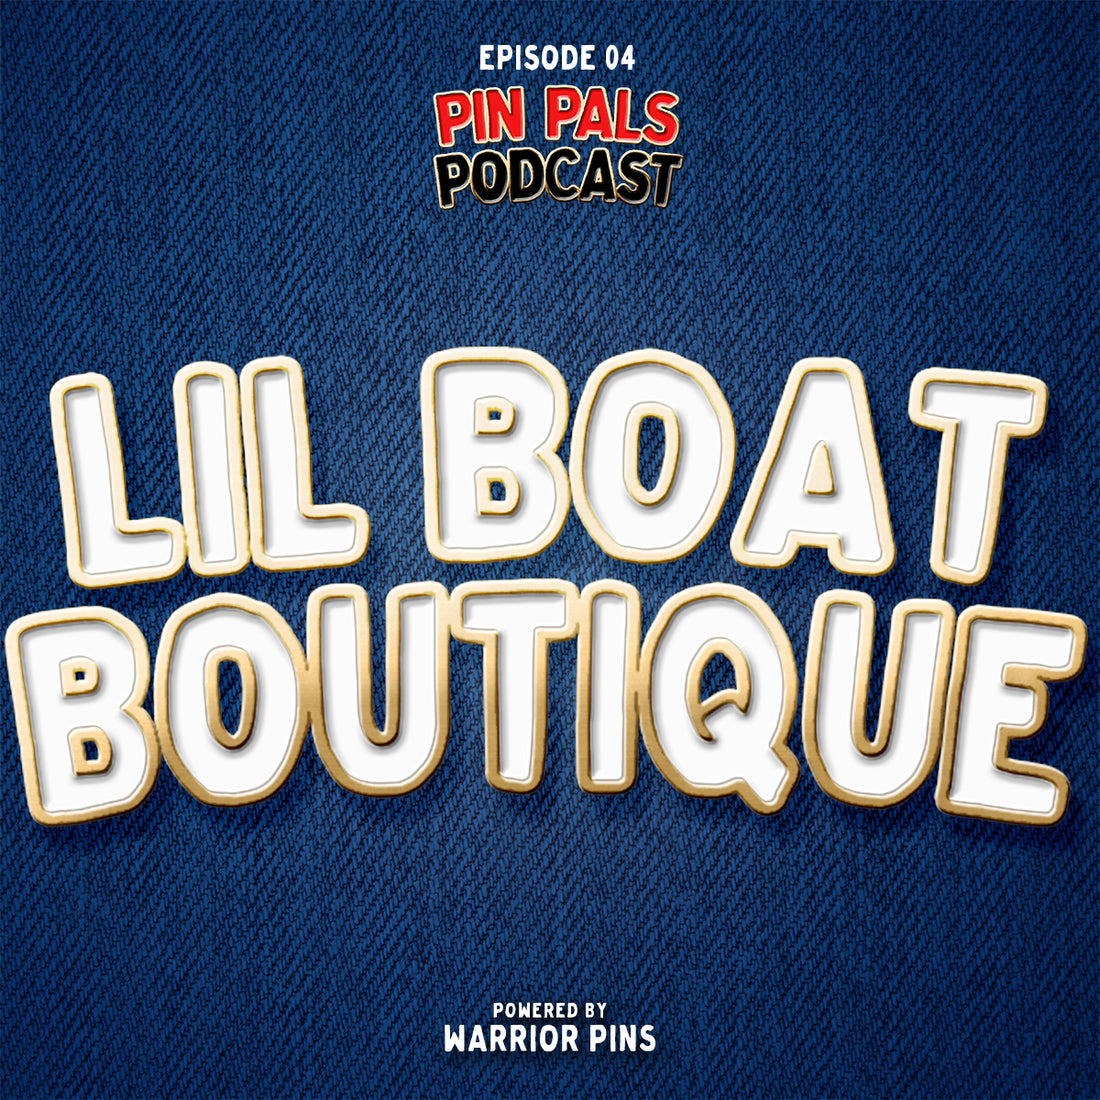 Pin Pals Podcast w/ Lil Boat Boutique